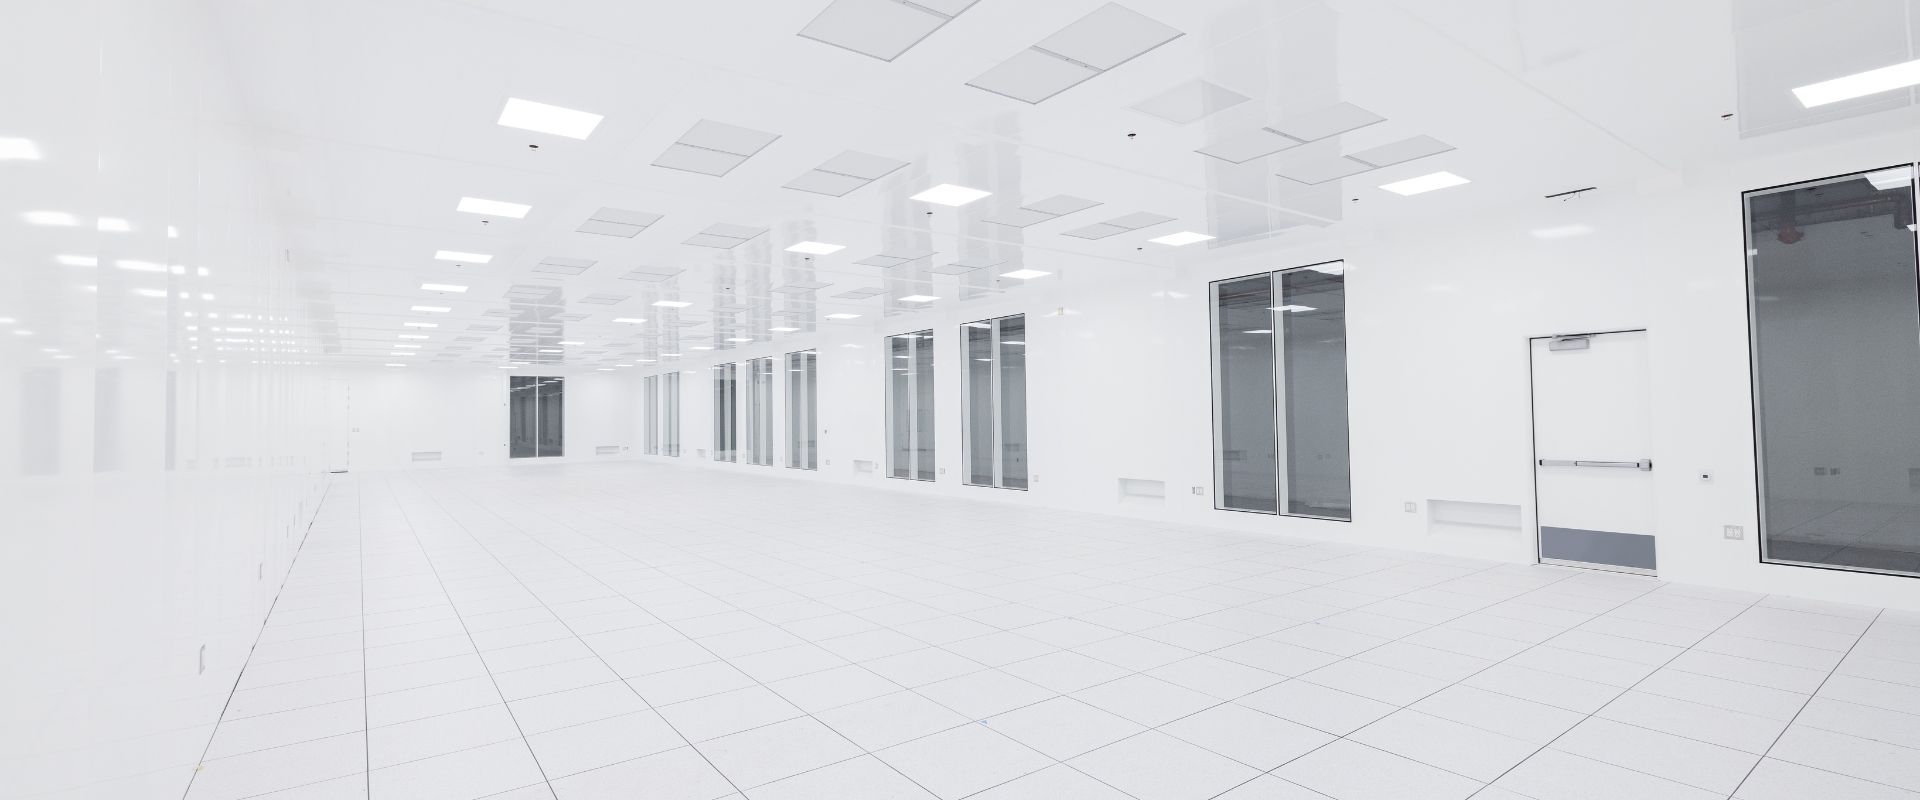 Cleanroom for semiconductor manufacturing